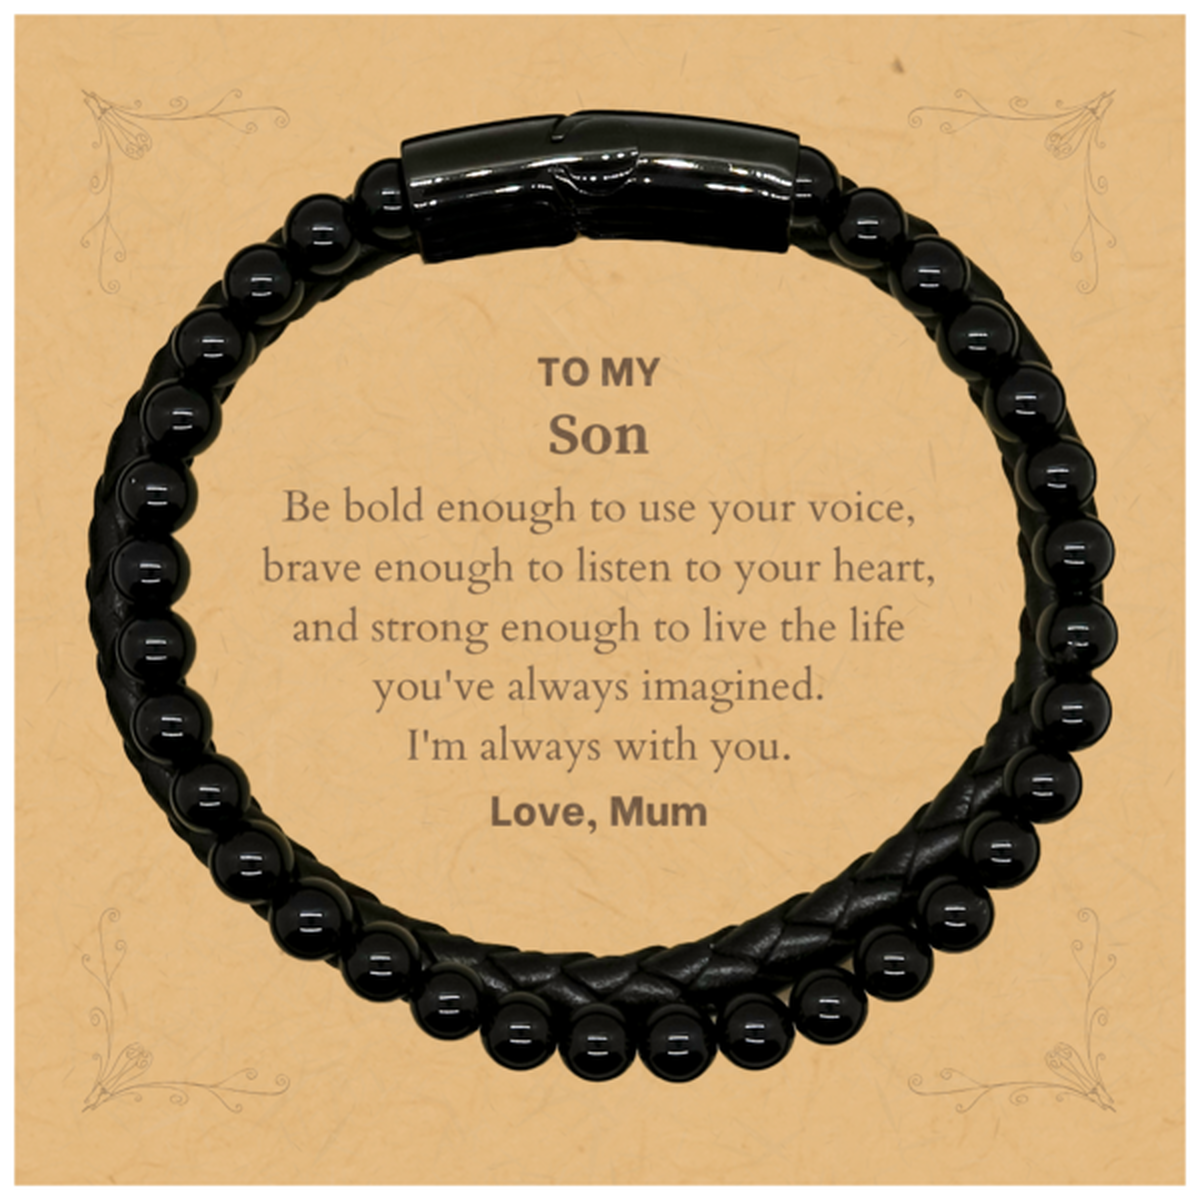 Keepsake Son Stone Leather Bracelets Gift Idea Graduation Christmas Birthday Son from Mum, Son Be bold enough to use your voice, brave enough to listen to your heart. Love, Mum